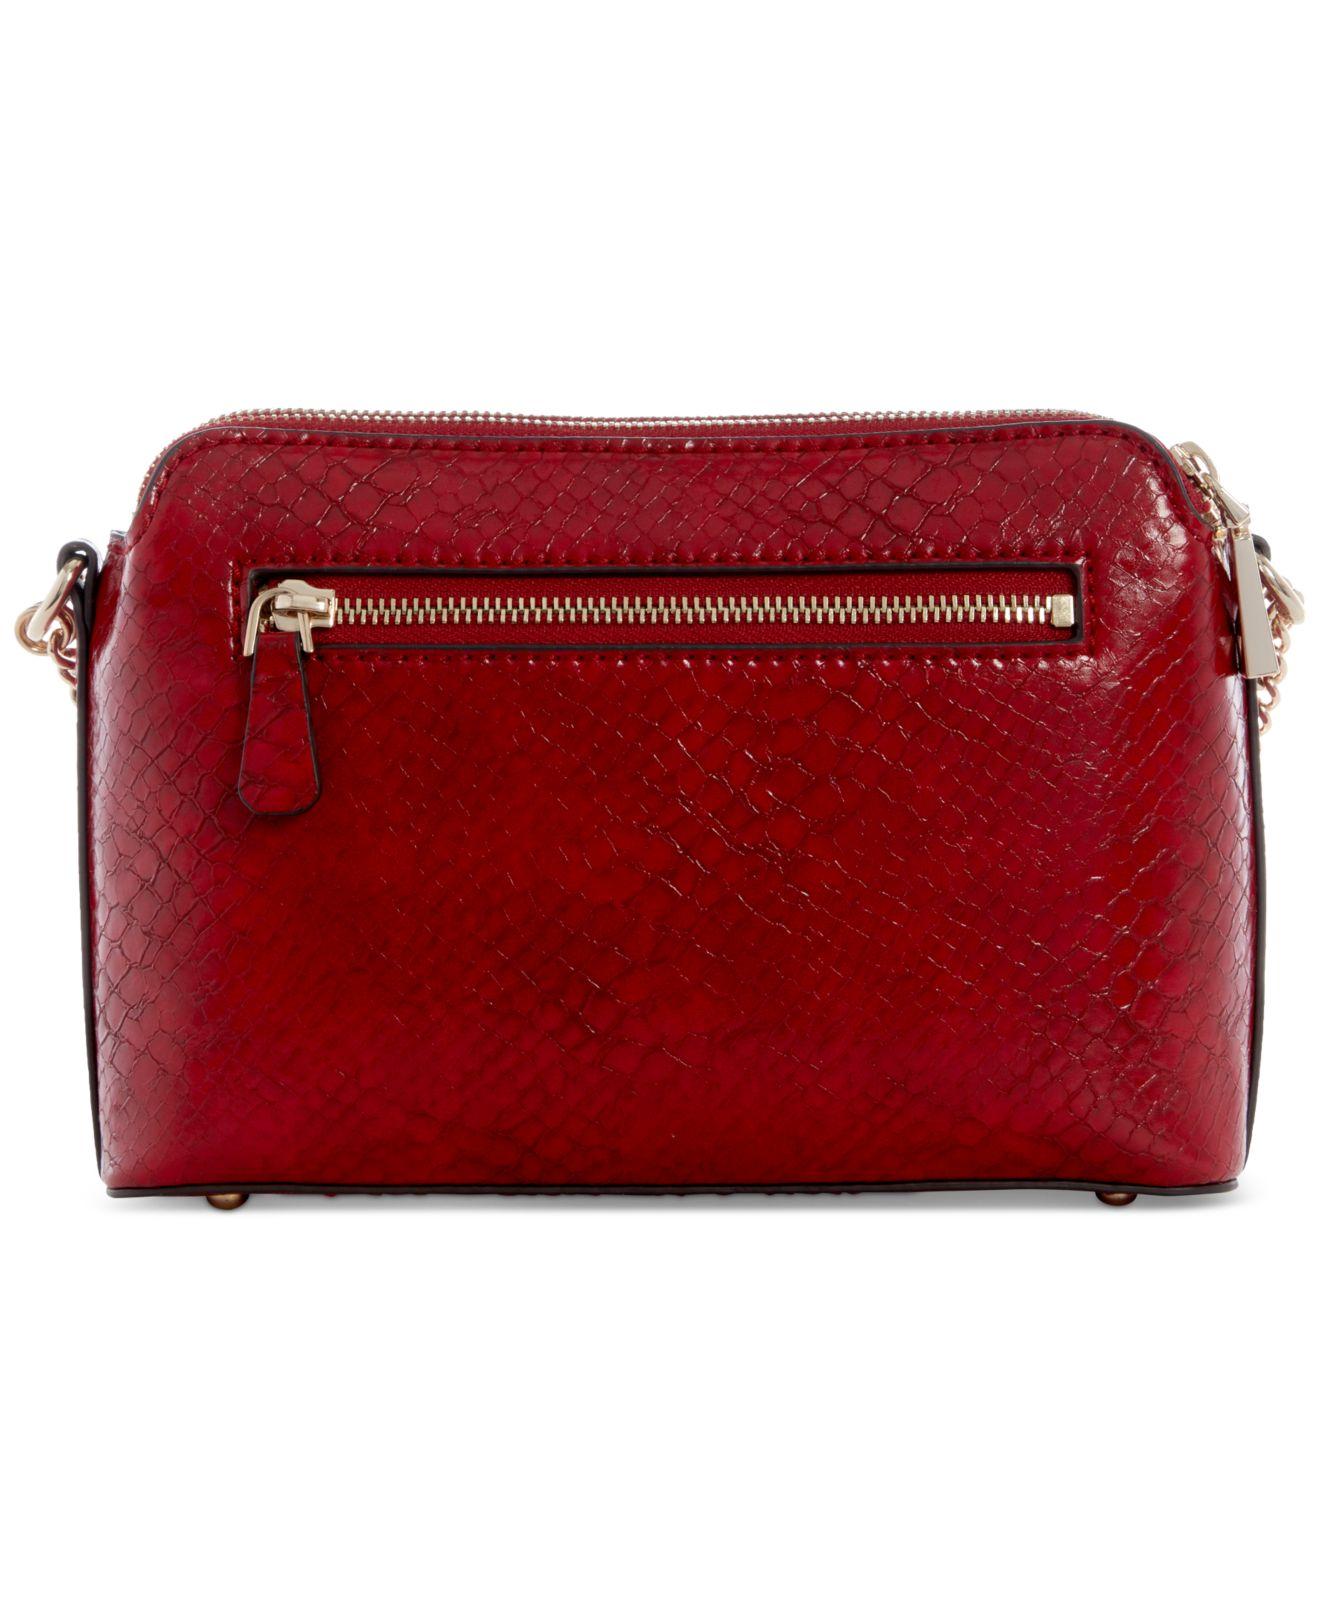 NWT GUESS MOONLIGHT PYTHON RED SHOULDER PURSE